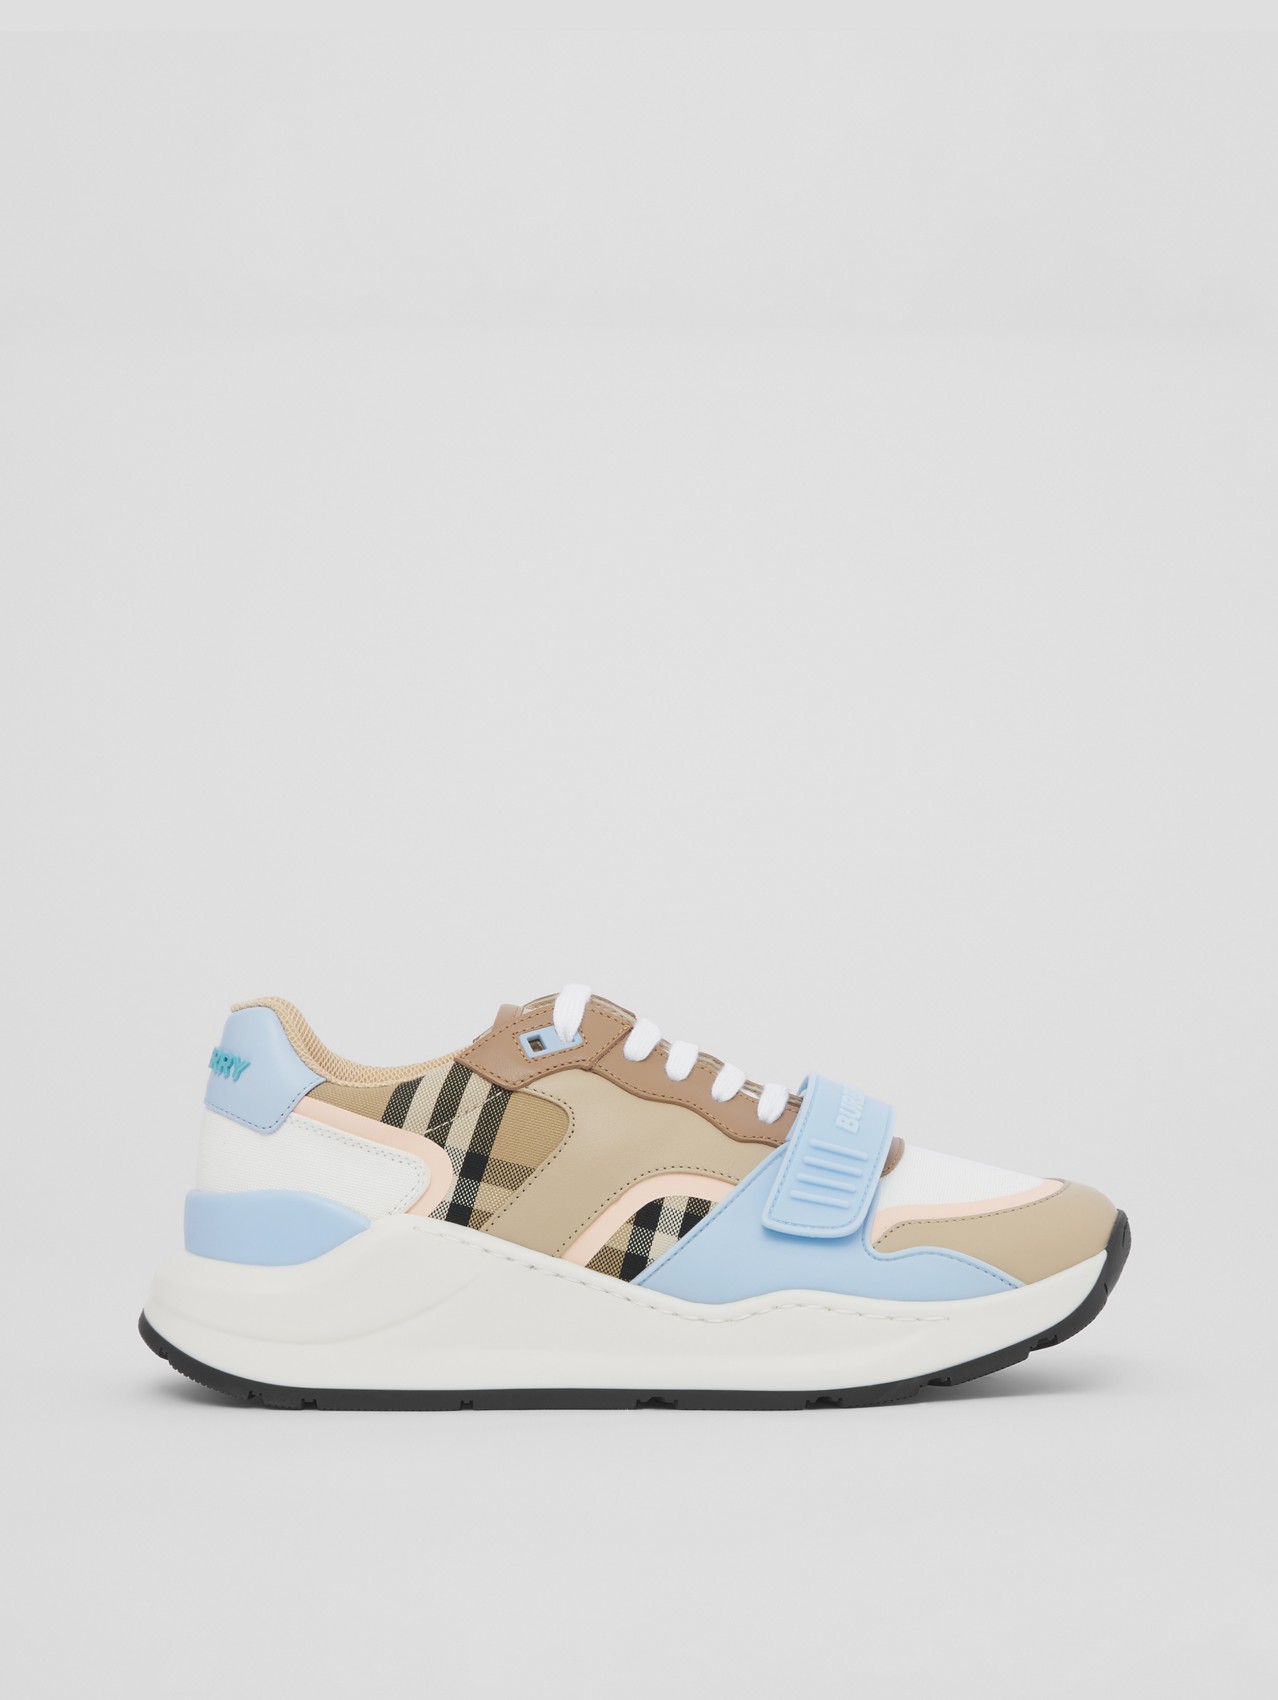 Check Cotton, Canvas and Leather Sneakers in Pale Blue/soft Fawn